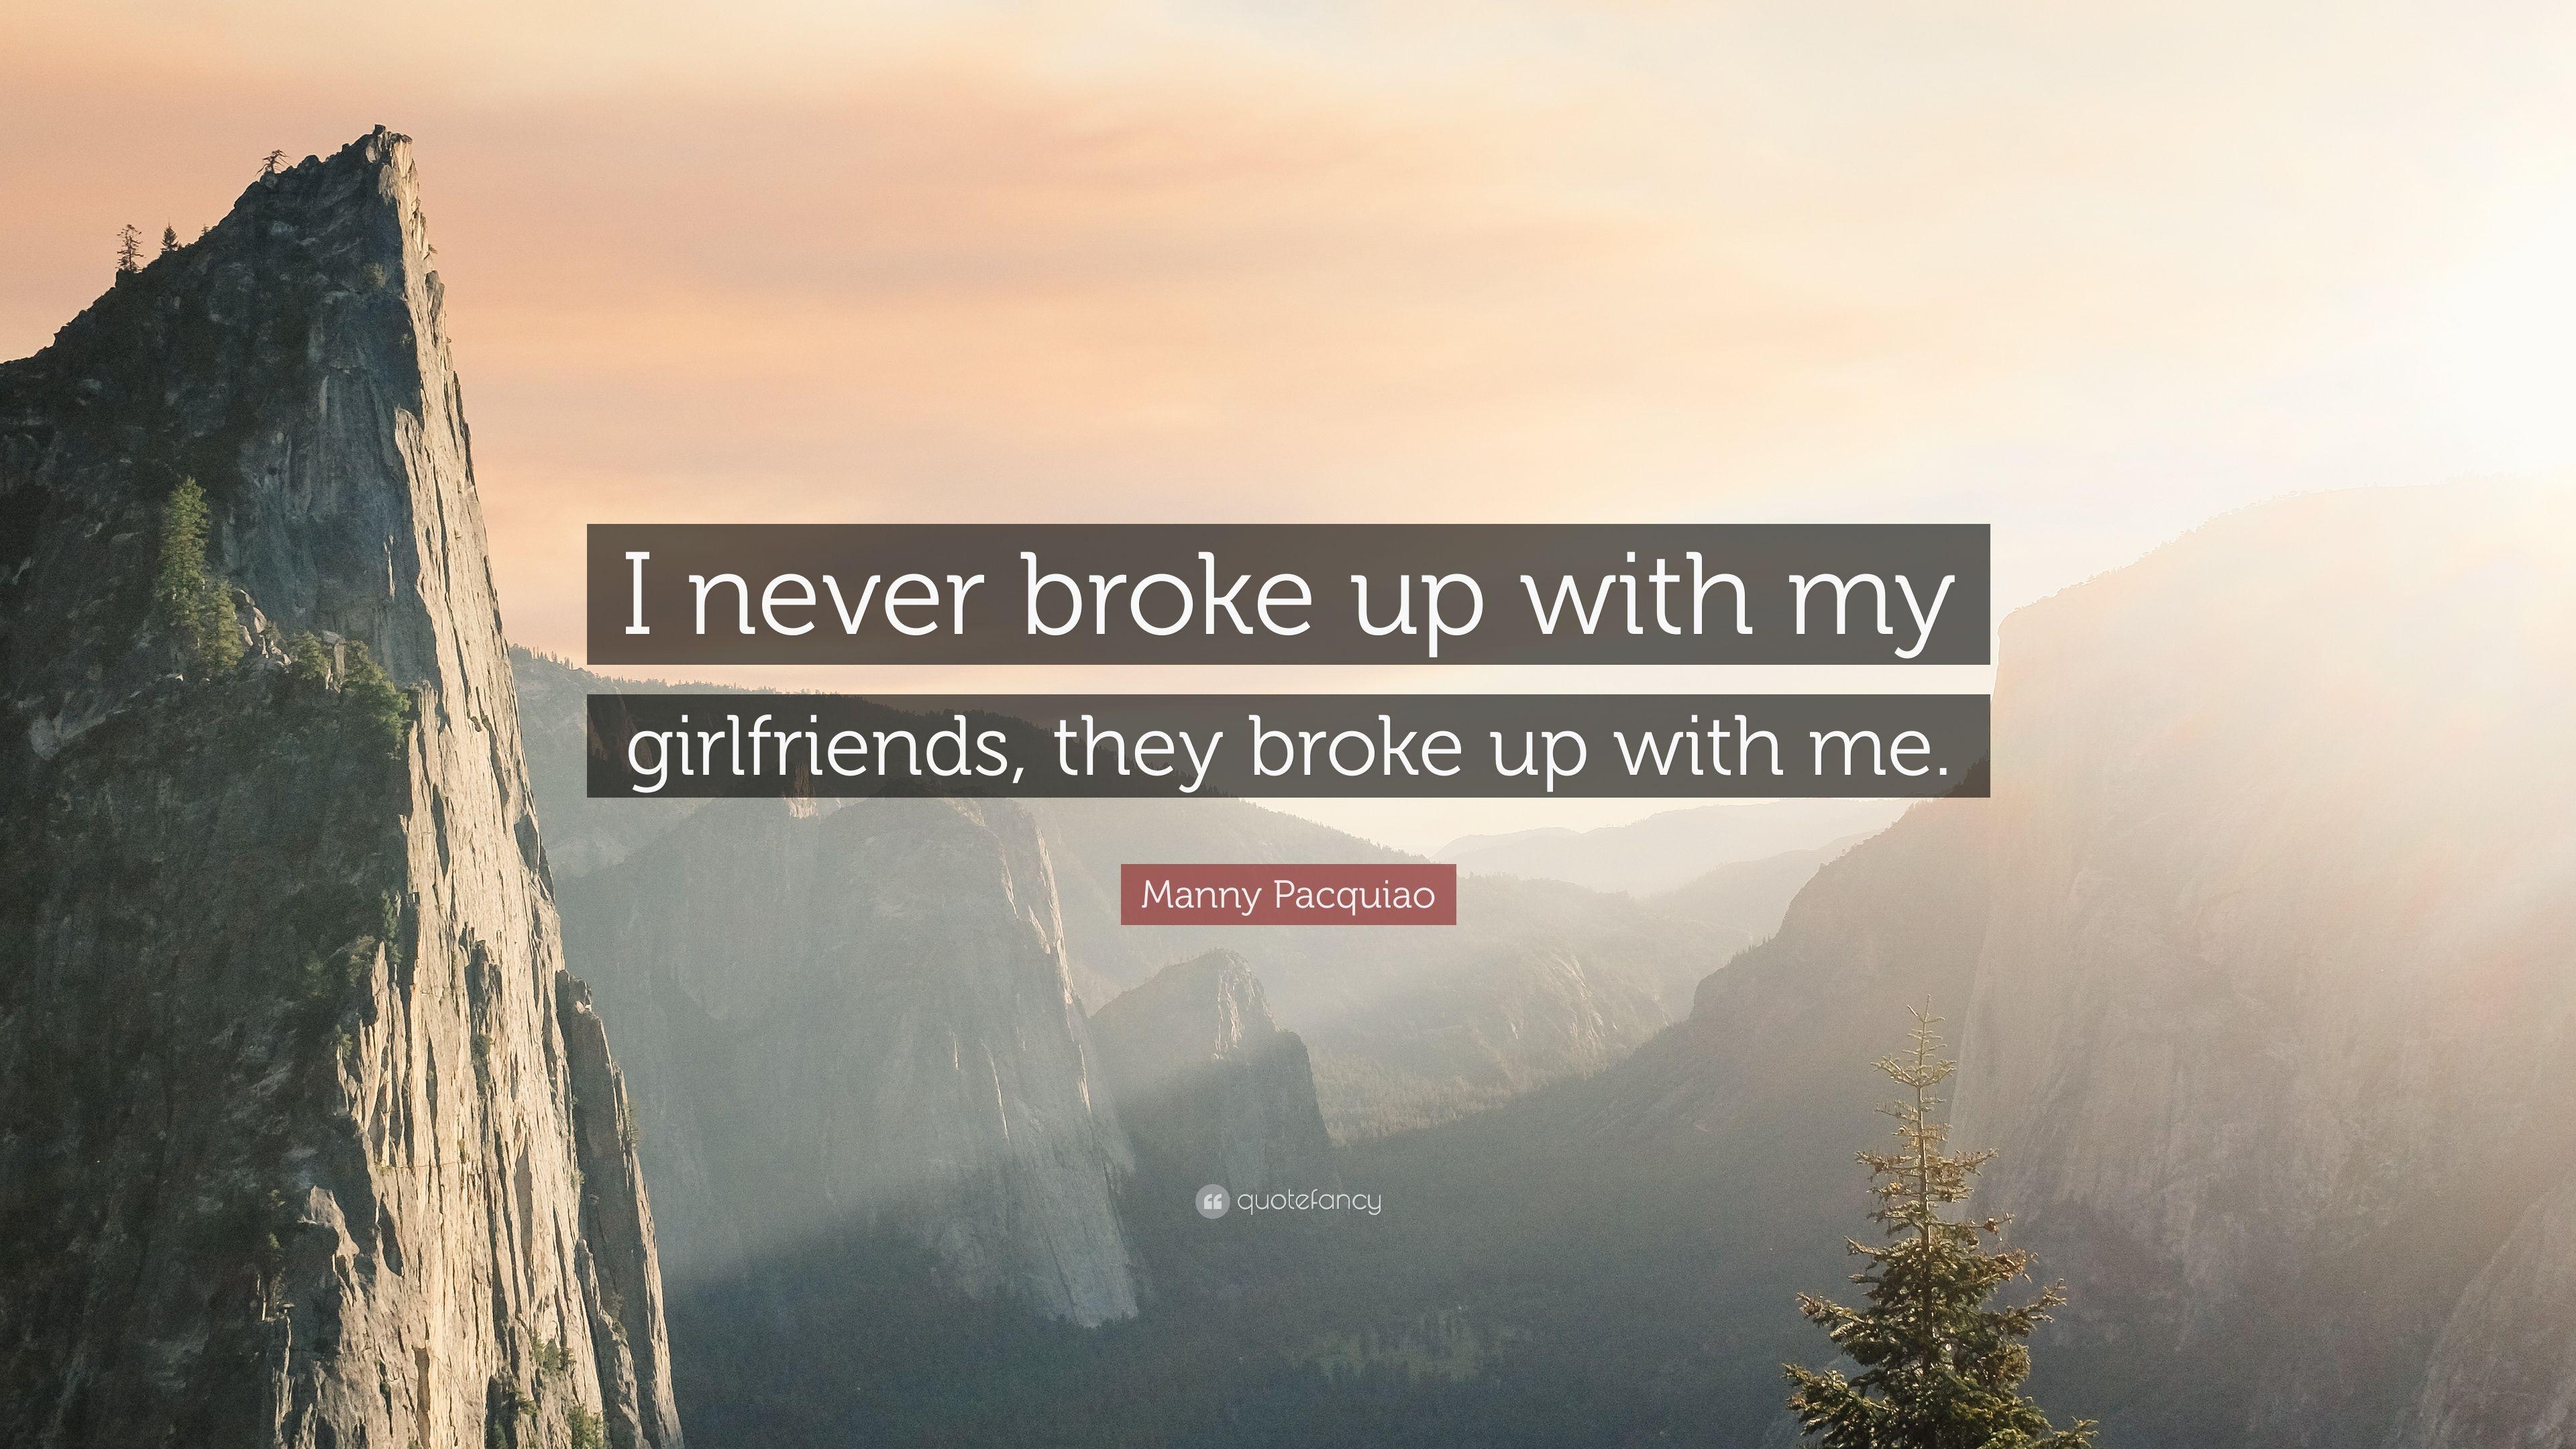 Manny Pacquiao Quote: “I never broke up with my girlfriends, they